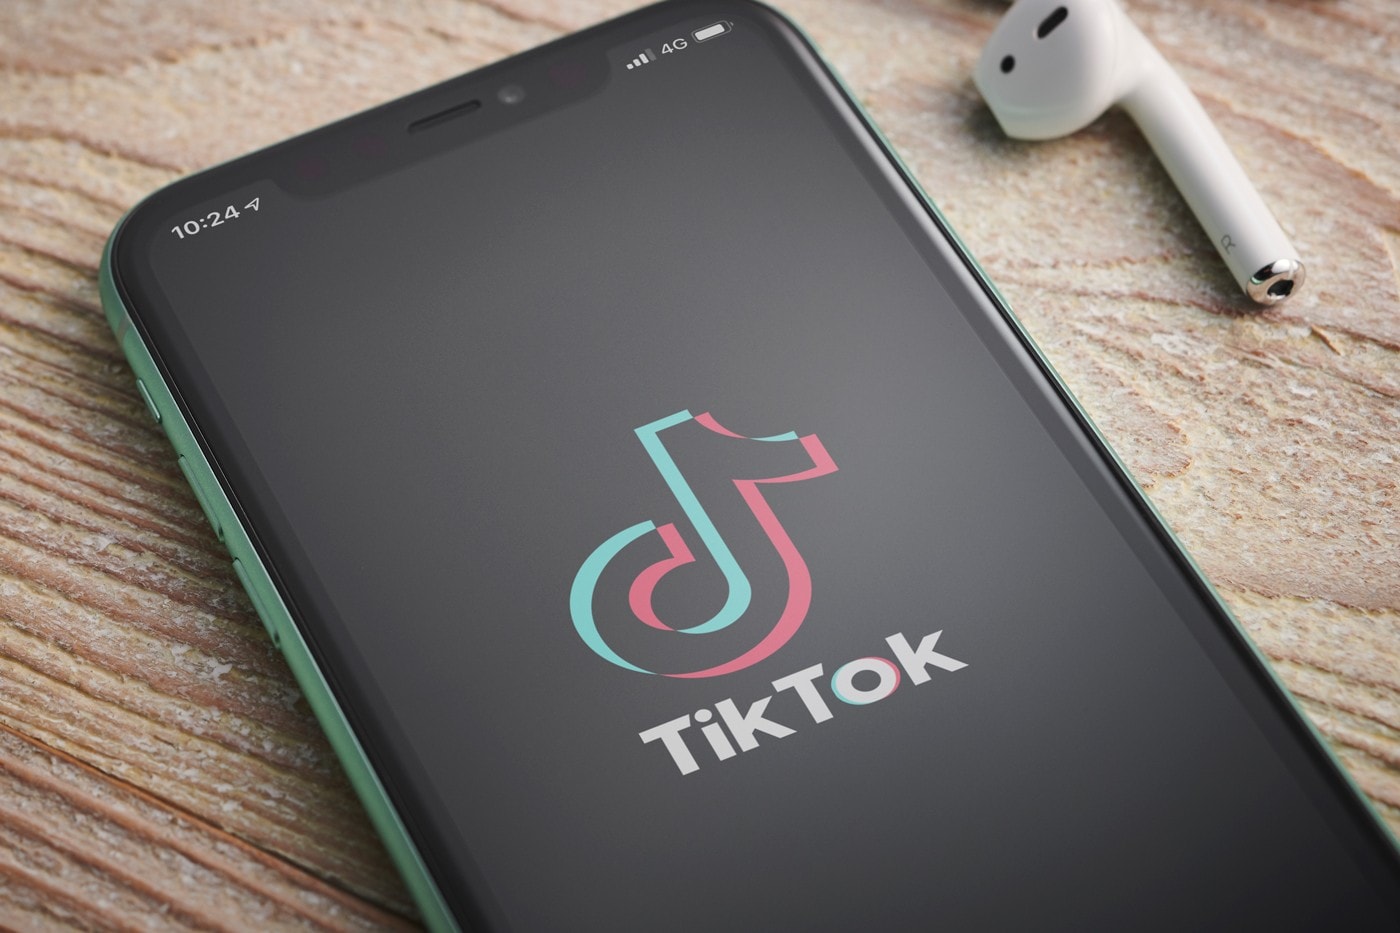 TikTok Data Sharing Privacy Concerns Hackers Social Media Video Safety Protection